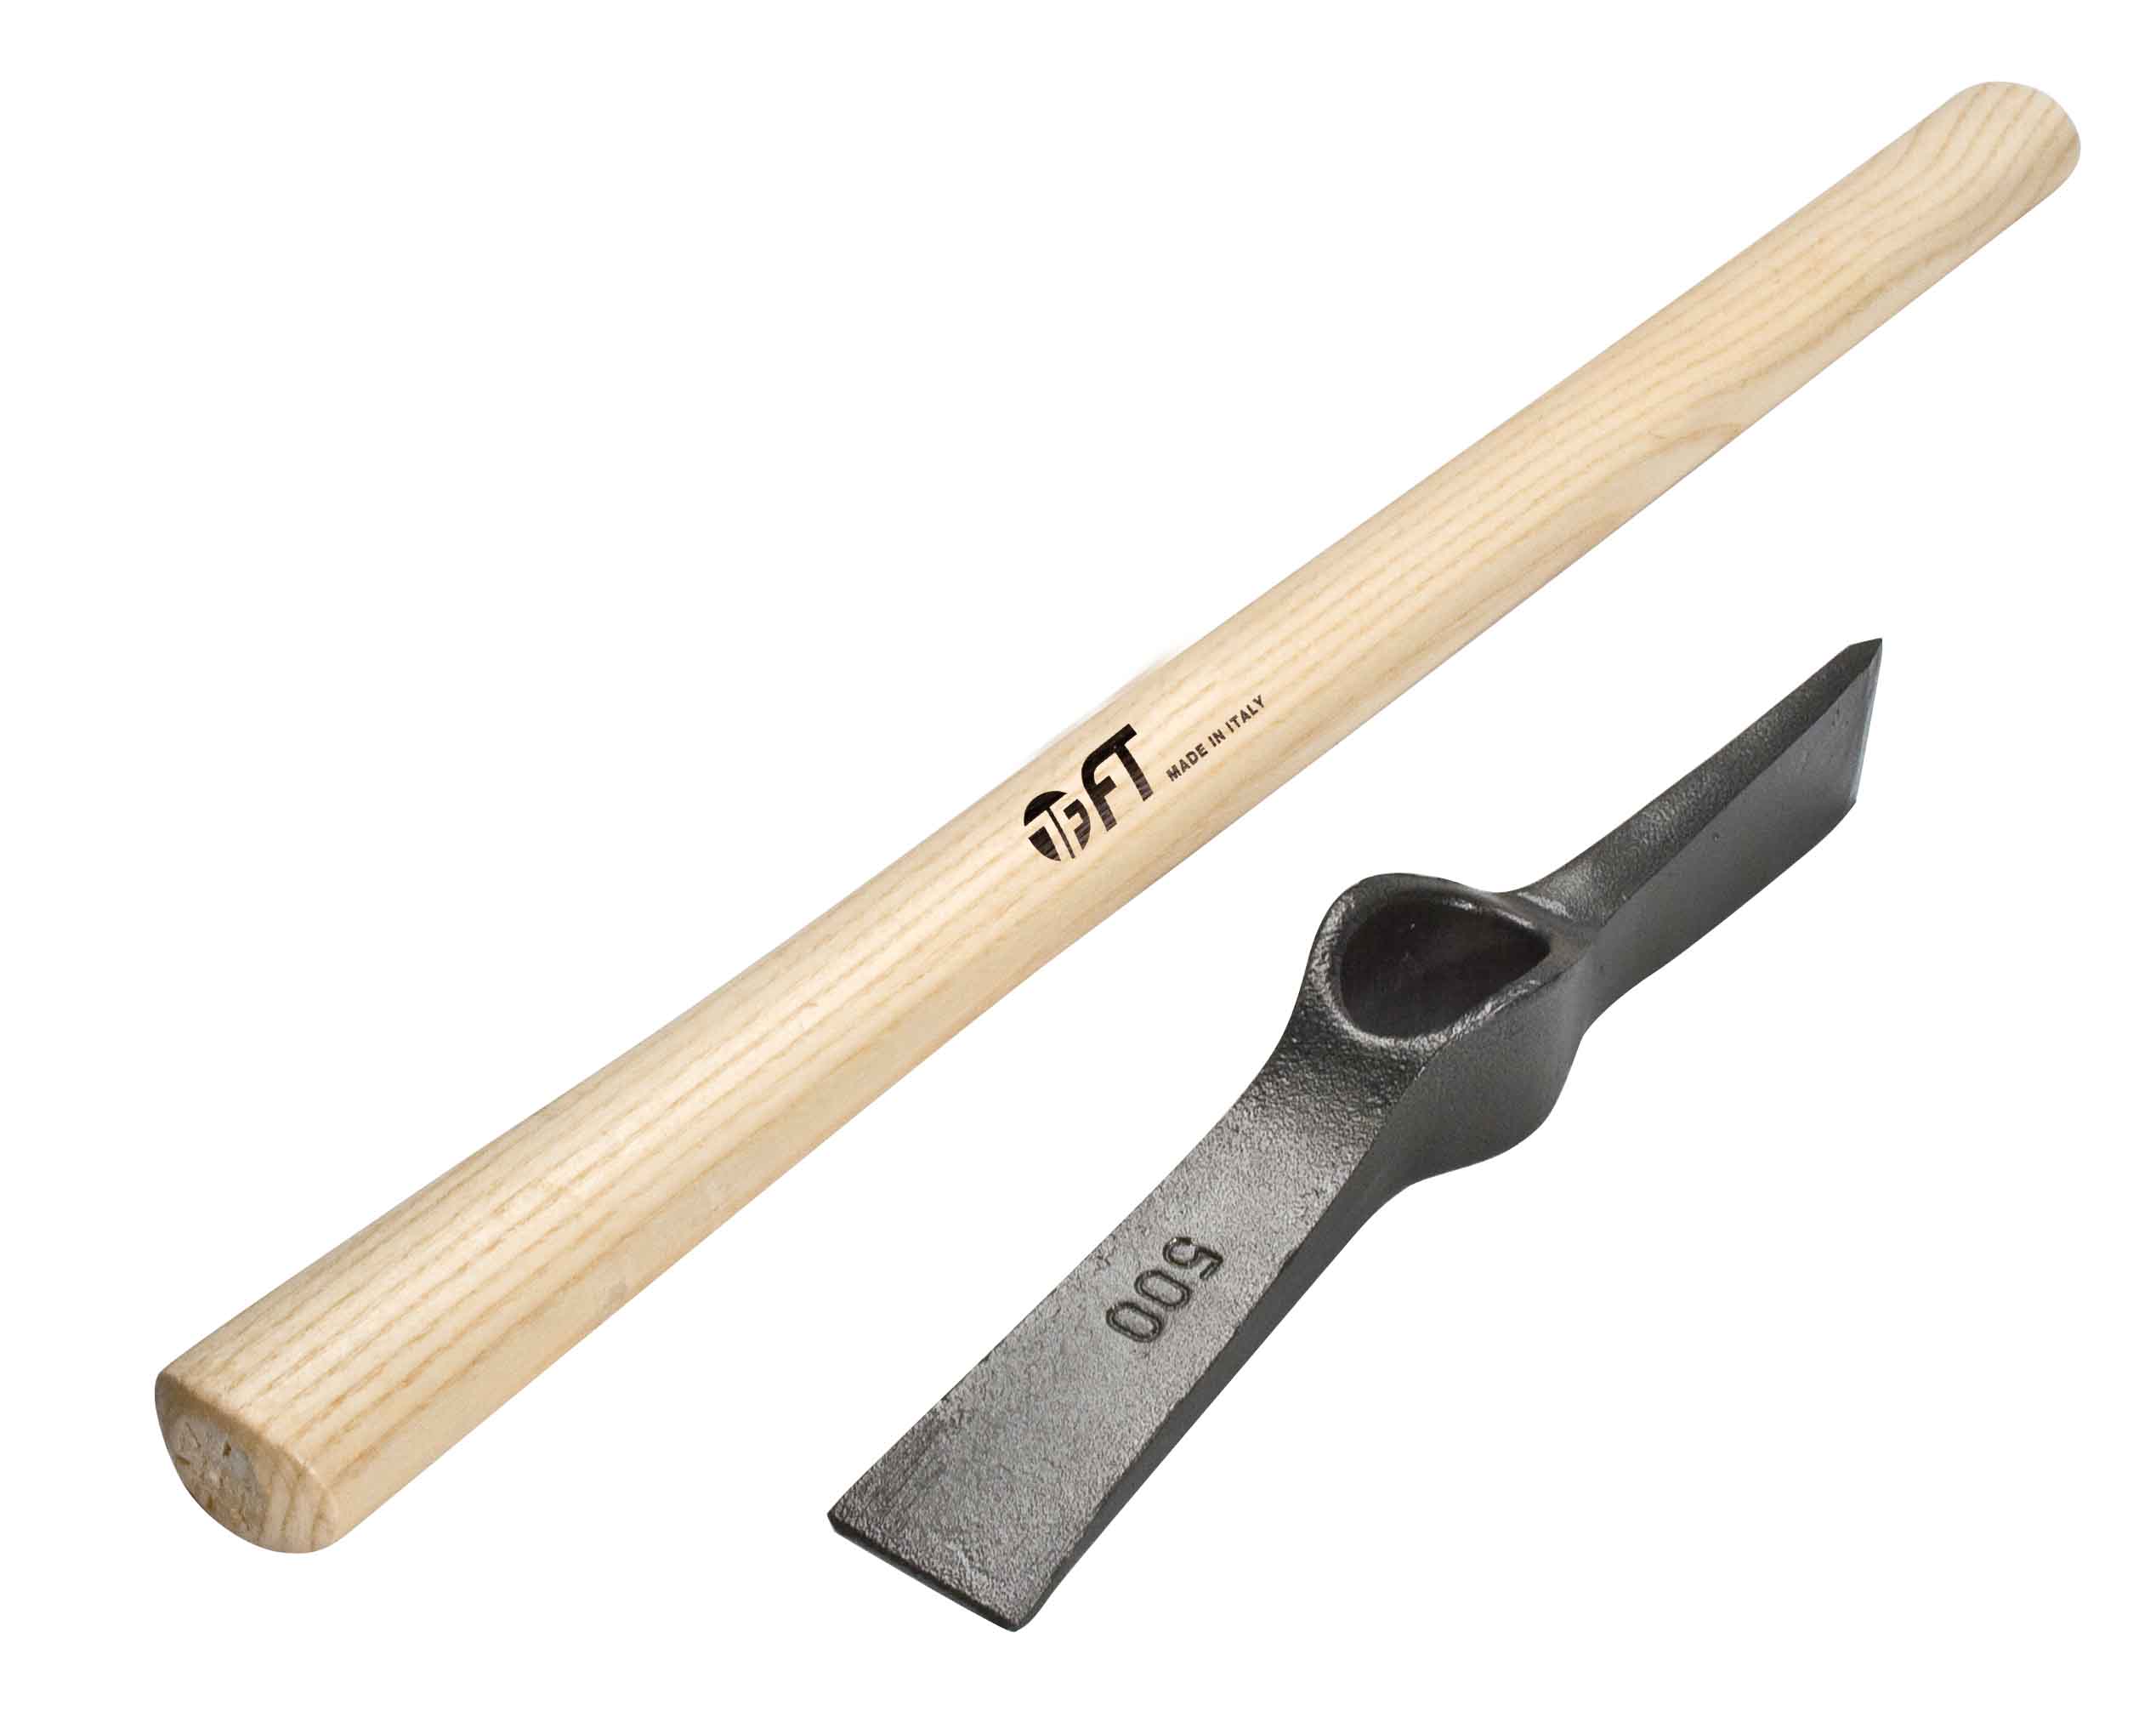 CHIPPING HAMMER “MALEPEGGIO” WITH HANDLE 400 g